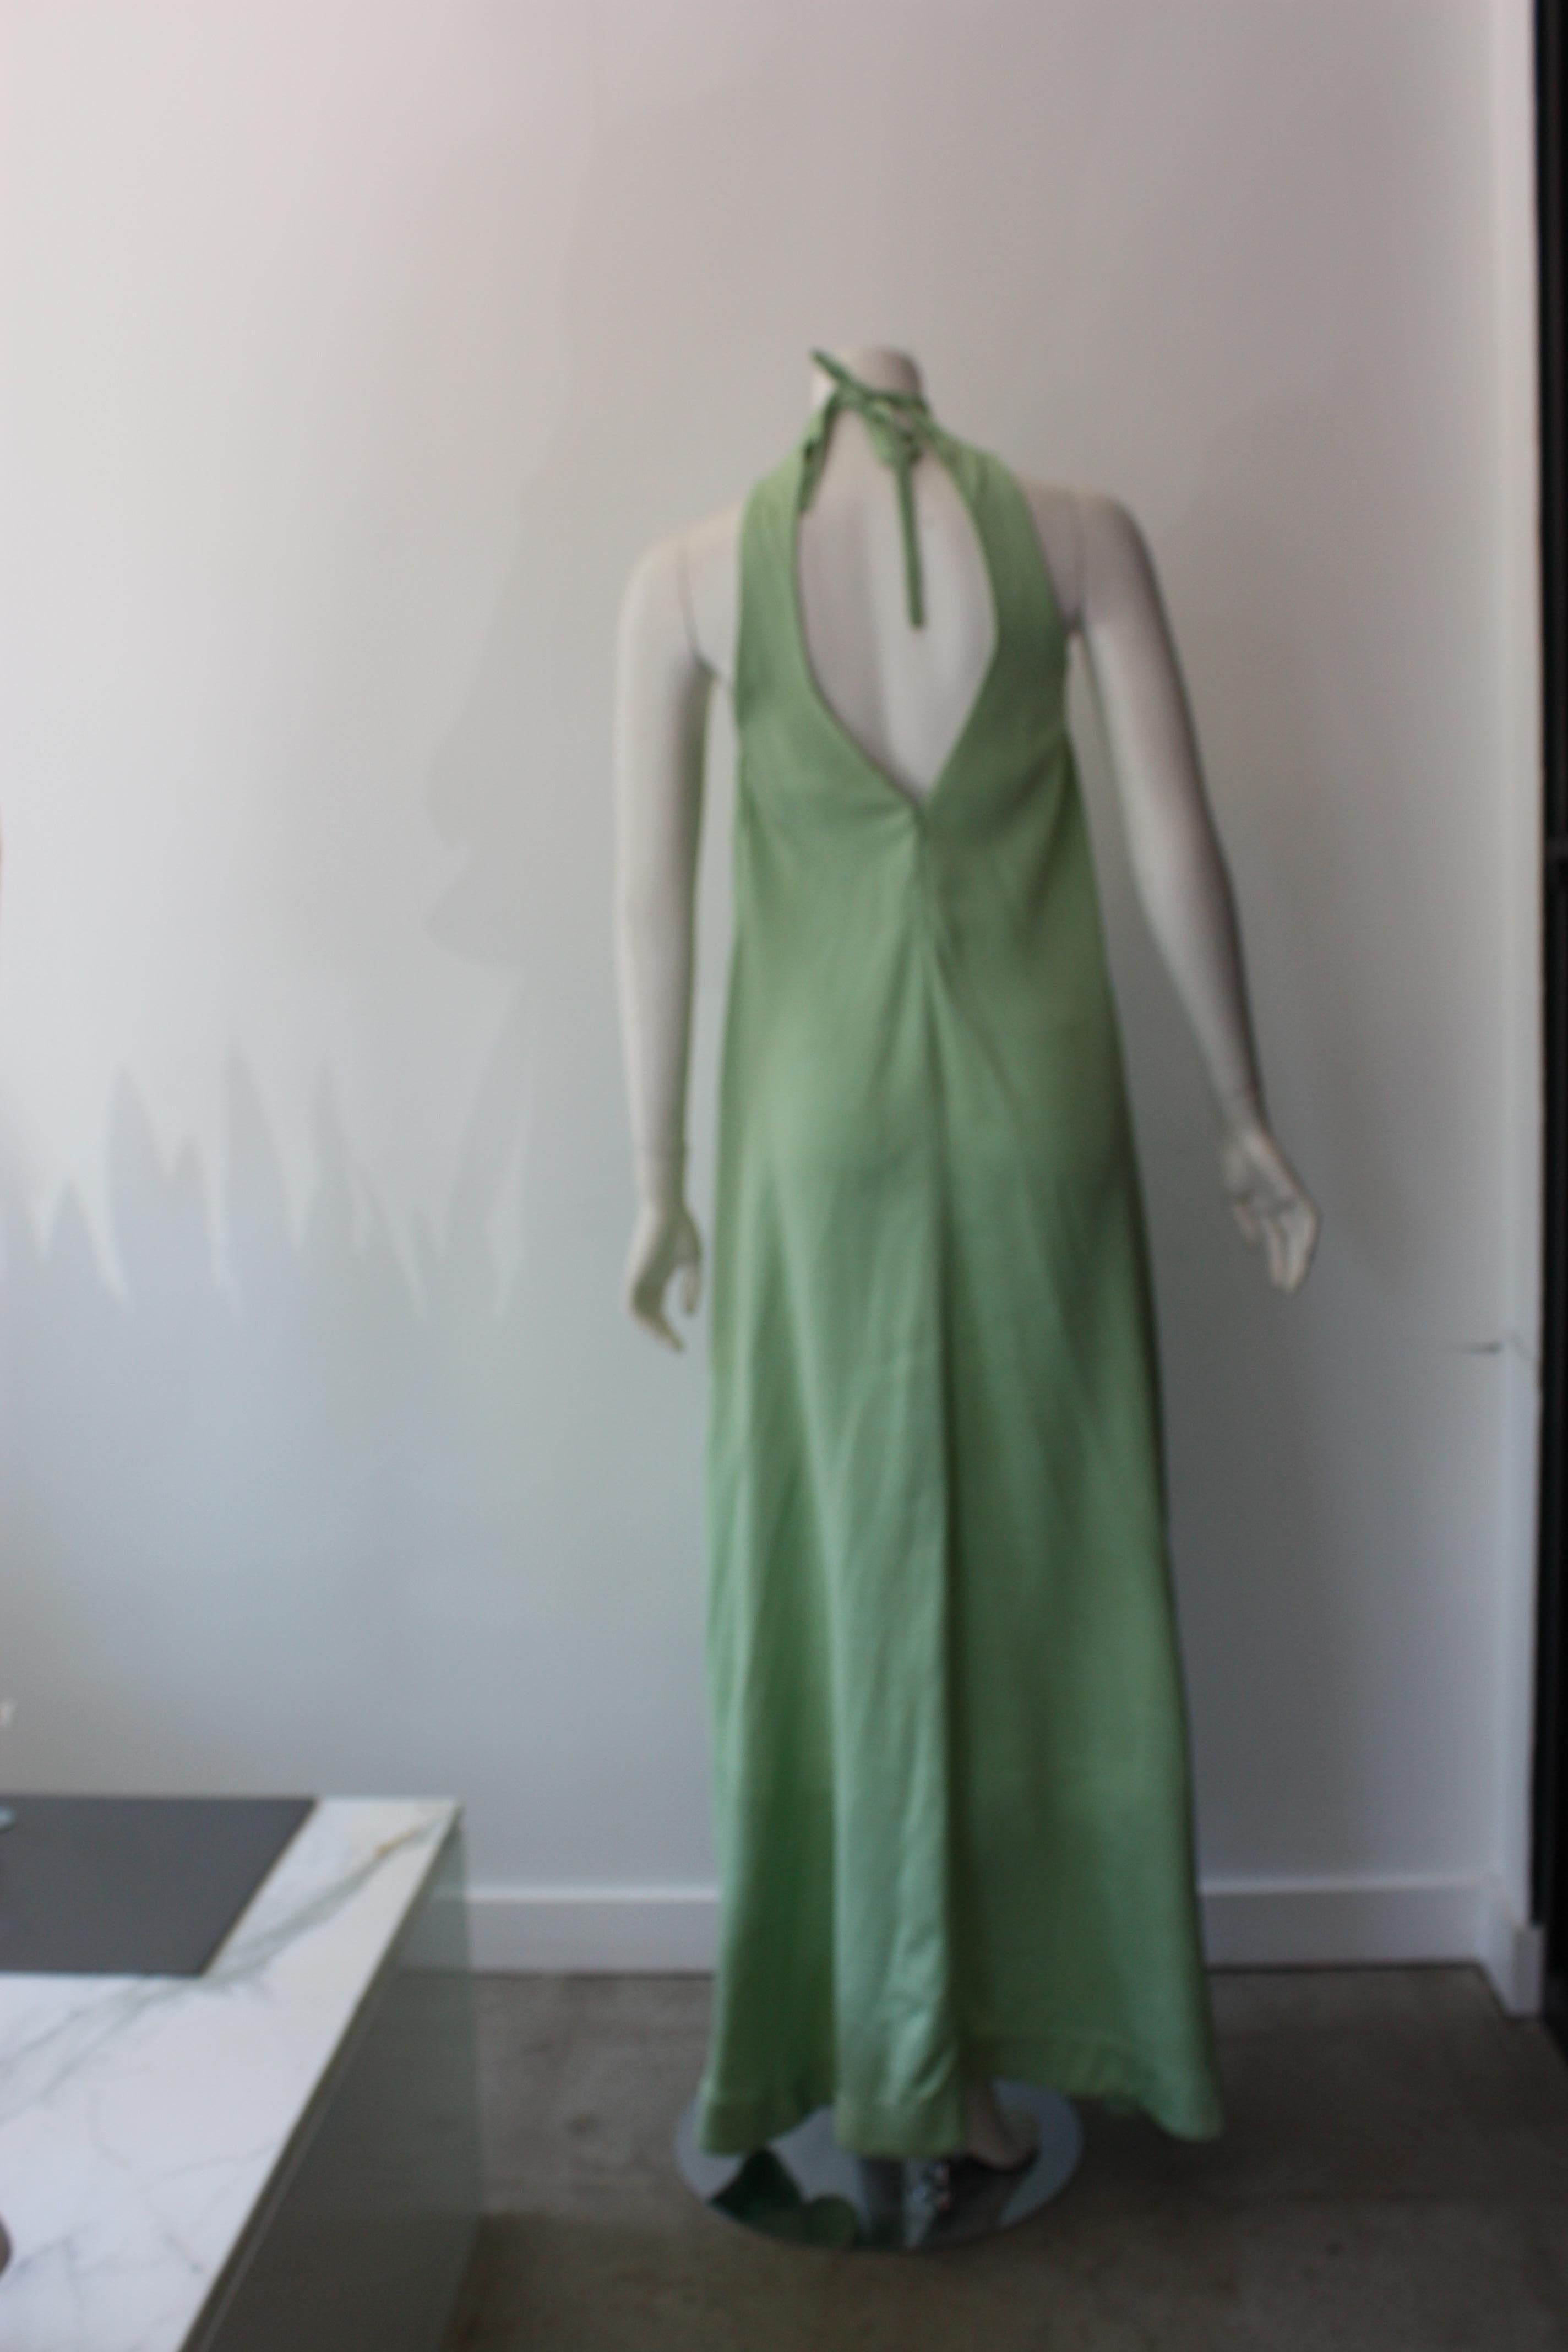 Cult Gaia Mint Green Dress  In Excellent Condition For Sale In Thousand Oaks, CA